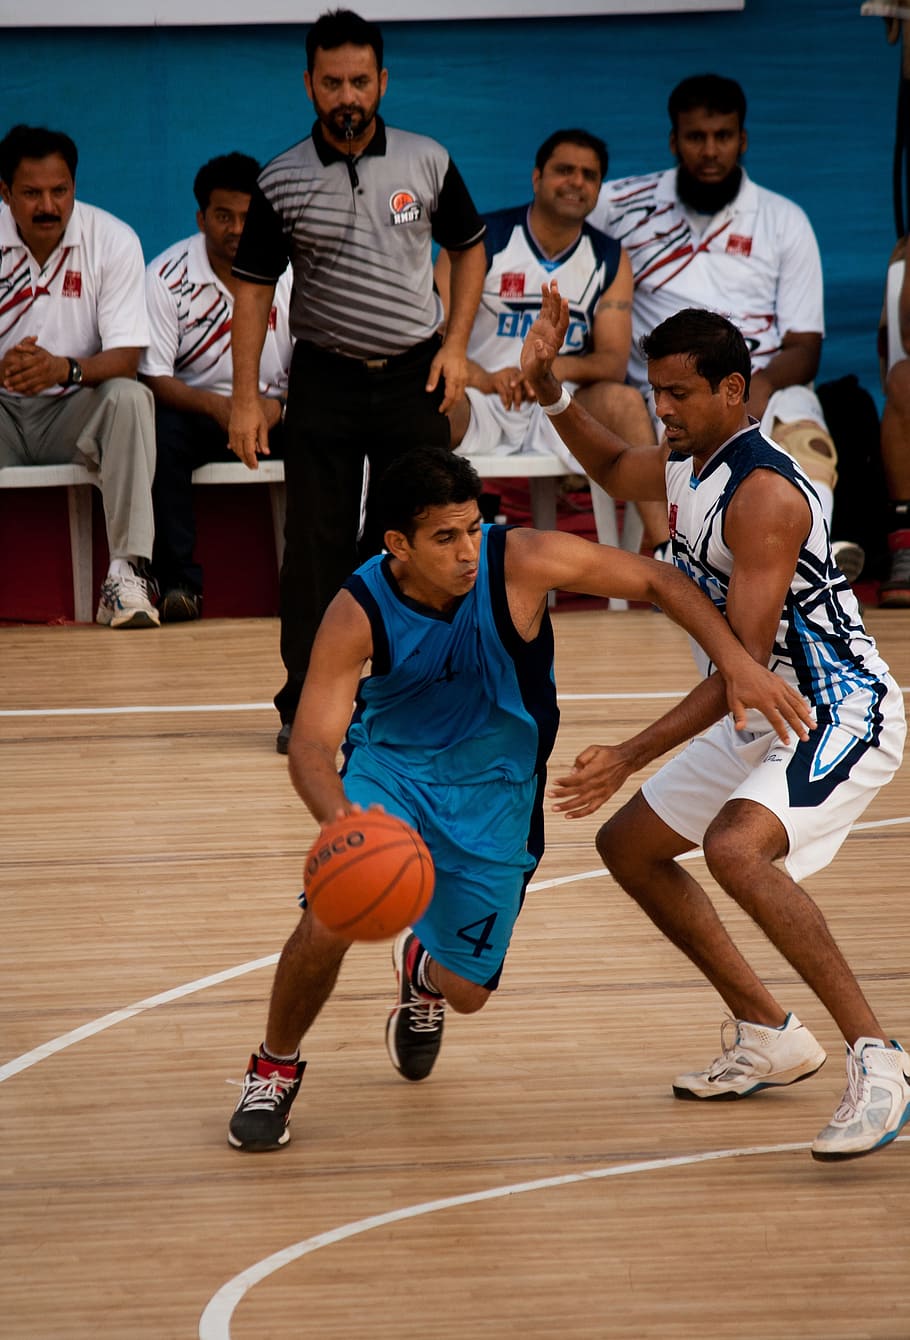 bouncing basketball, action, players, game, play, ball, men, sport, group of people, lifestyles